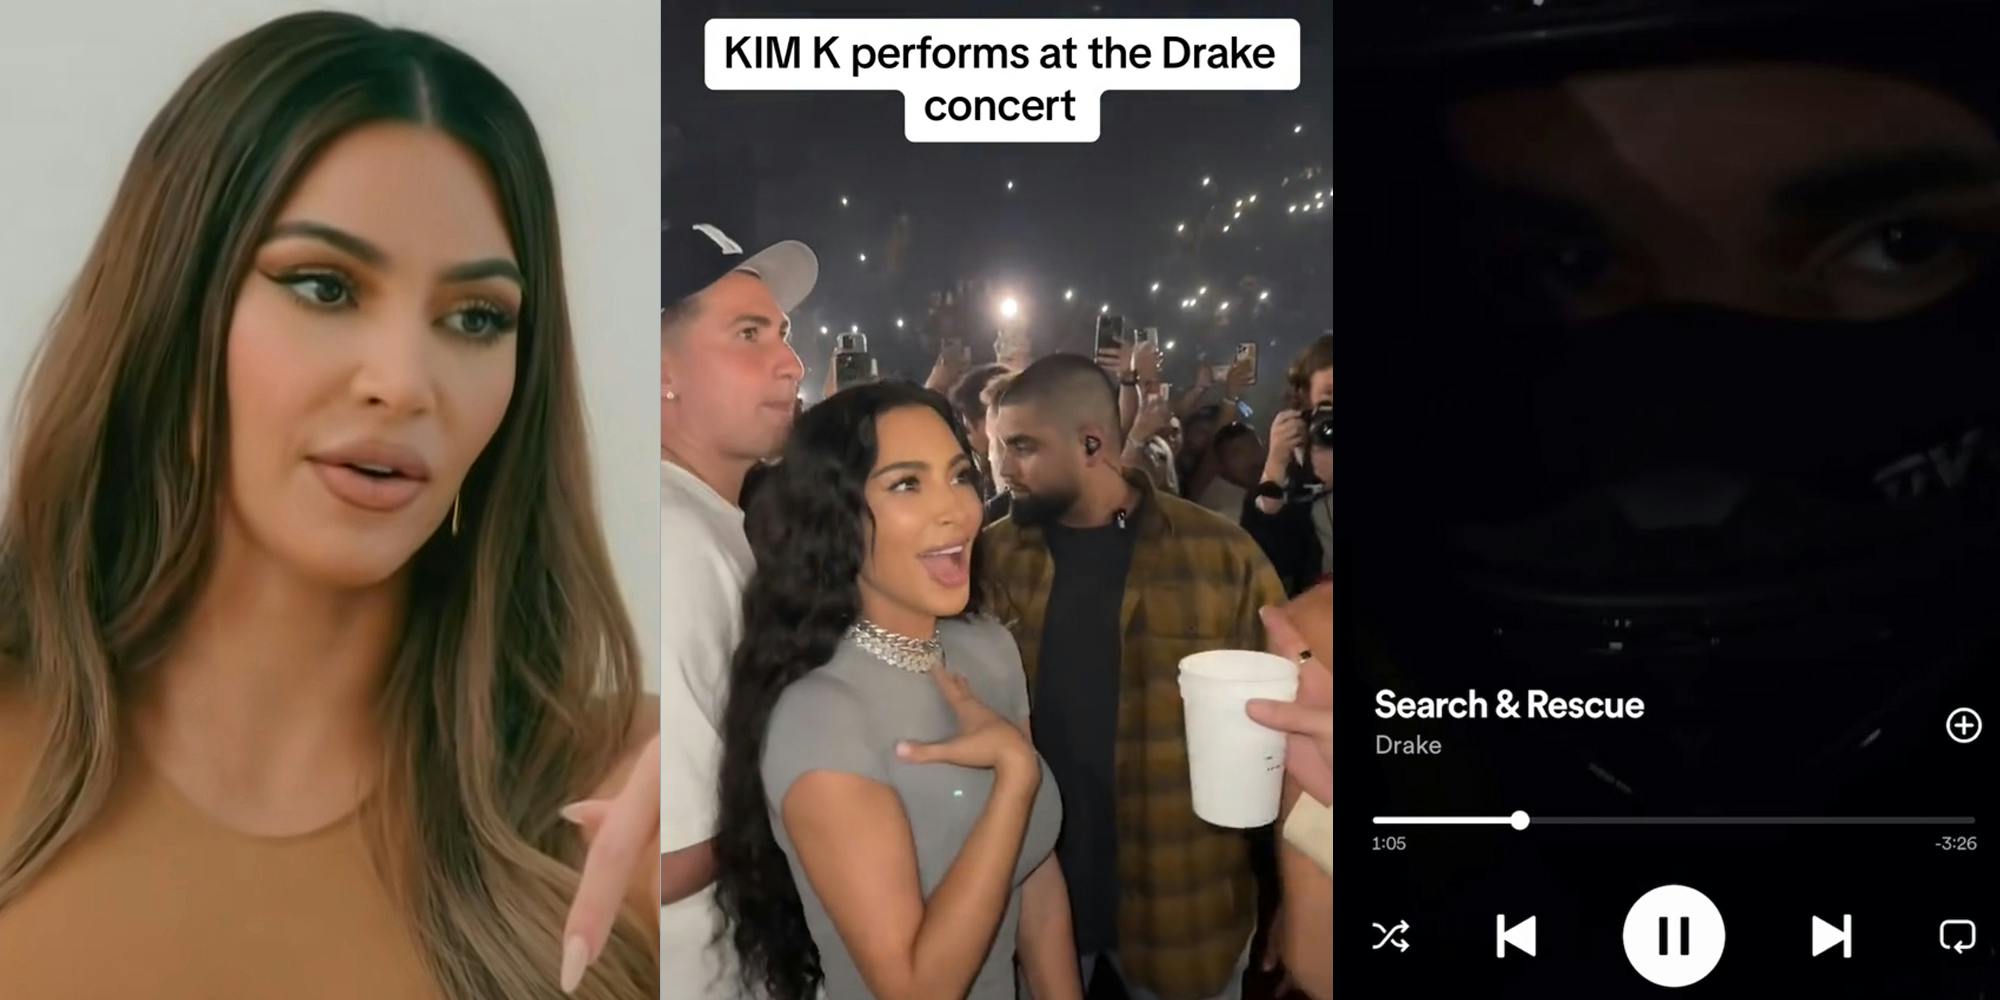 Kim Kardashian speaking in front of white wall in Keeping up with the Kardashians (l) Kim Kardashian singing at Drake concert with caption "KIM K performs at the Drake concert (c) Drake song Search & Rescue on Spotify (r)